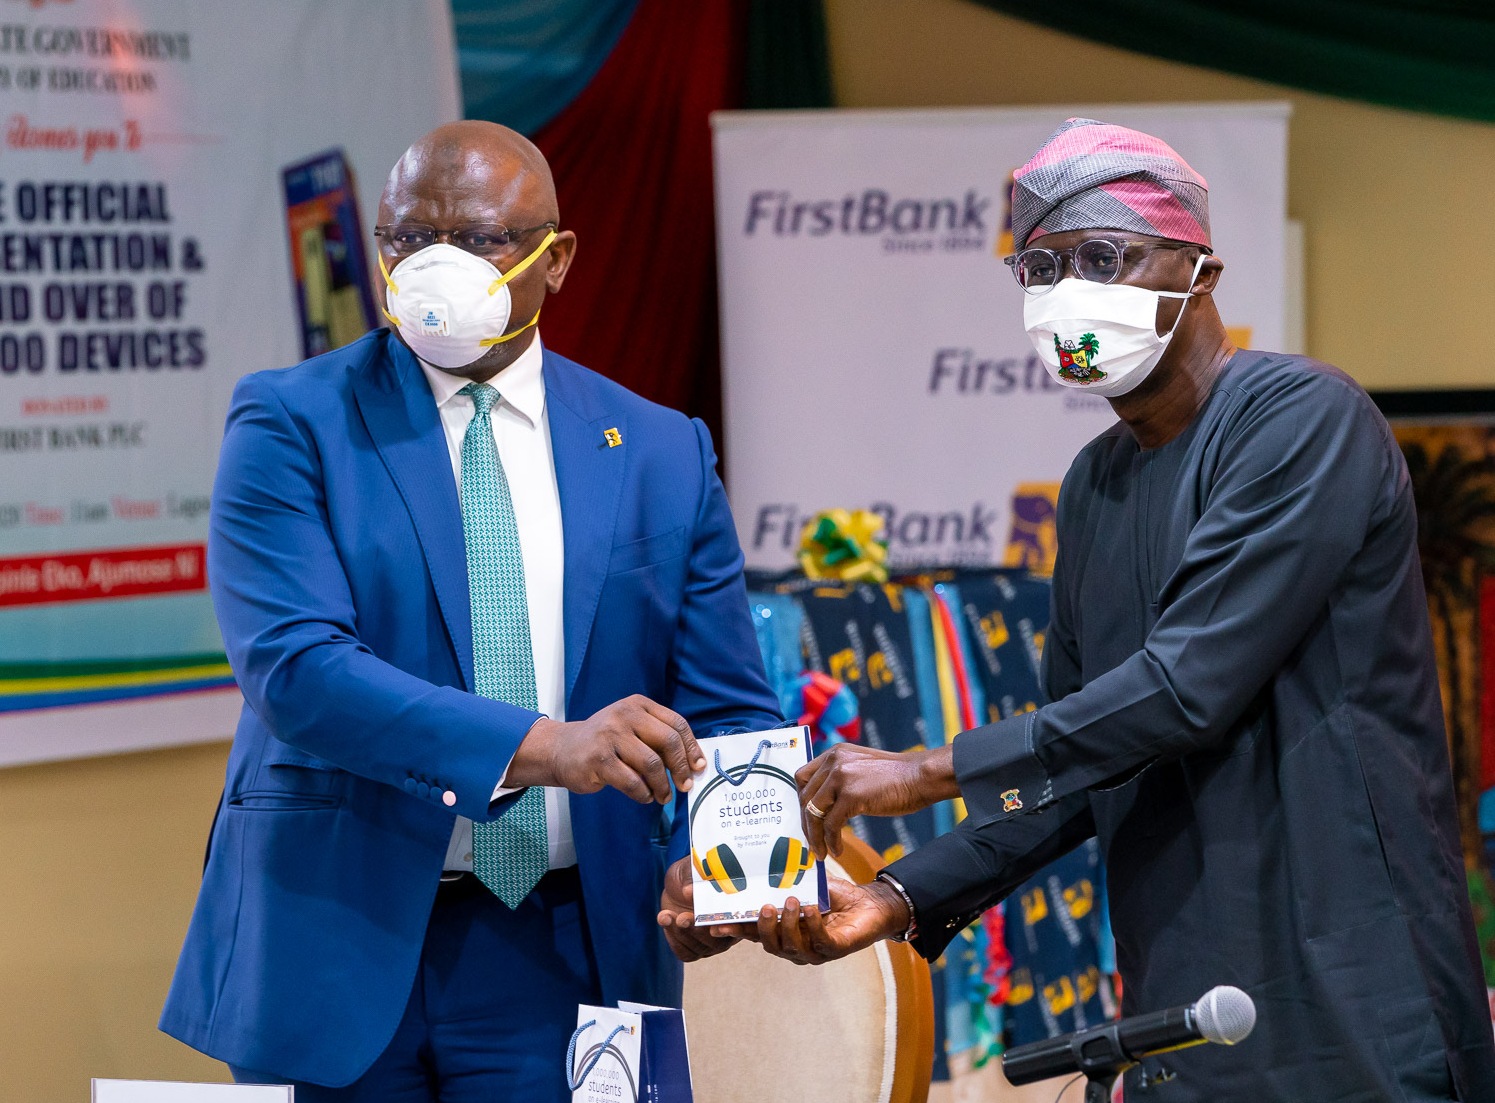 L-R: Managing Director/CEO, First Bank PLC, Dr. Adeola Adeduntan and Lagos State Governor, Mr. Babajide Sanwo-Olu during the presentation of 20,000 E-Learning devices for Lagos State Schools by First Bank at the Lagos House, Marina, on Thursday, June 11, 2020.